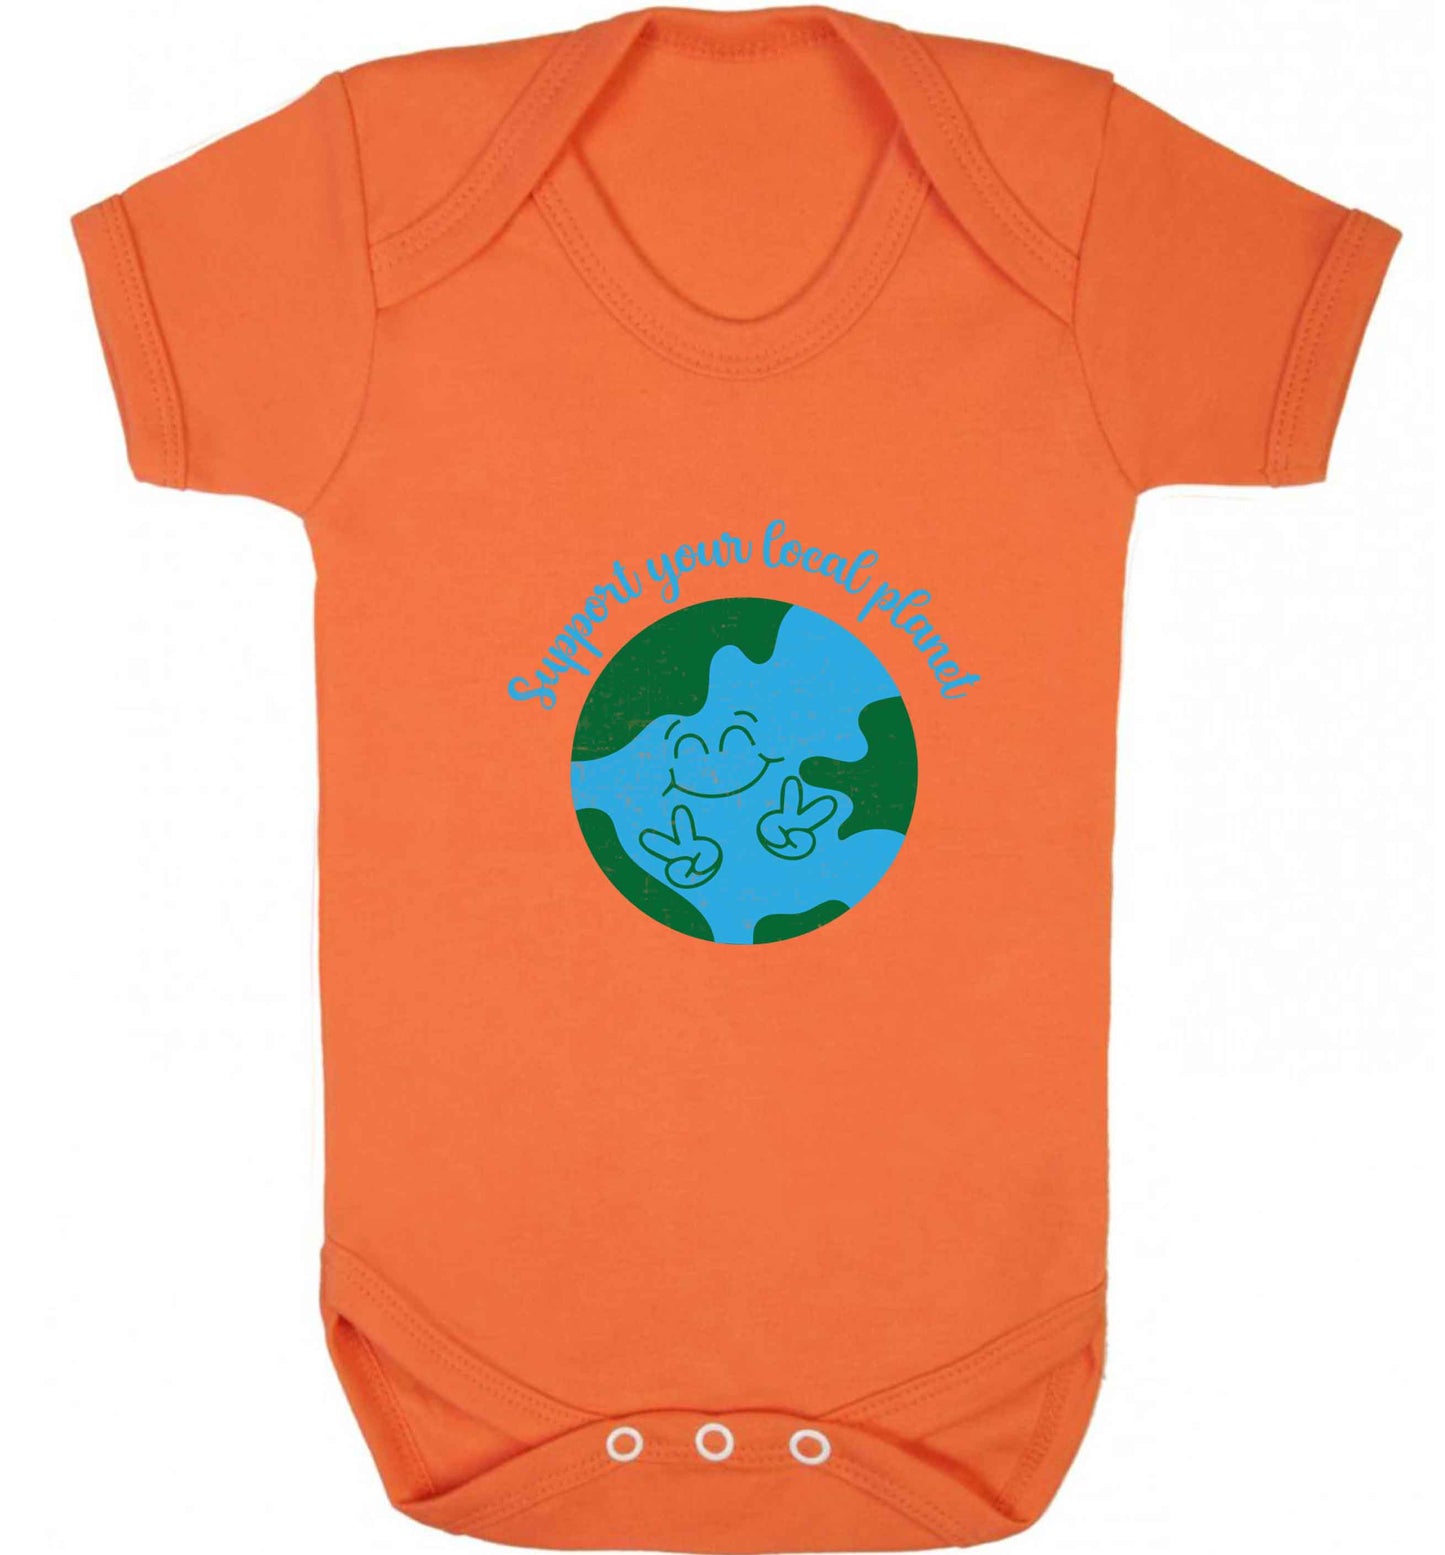 Support your local planet baby vest orange 18-24 months